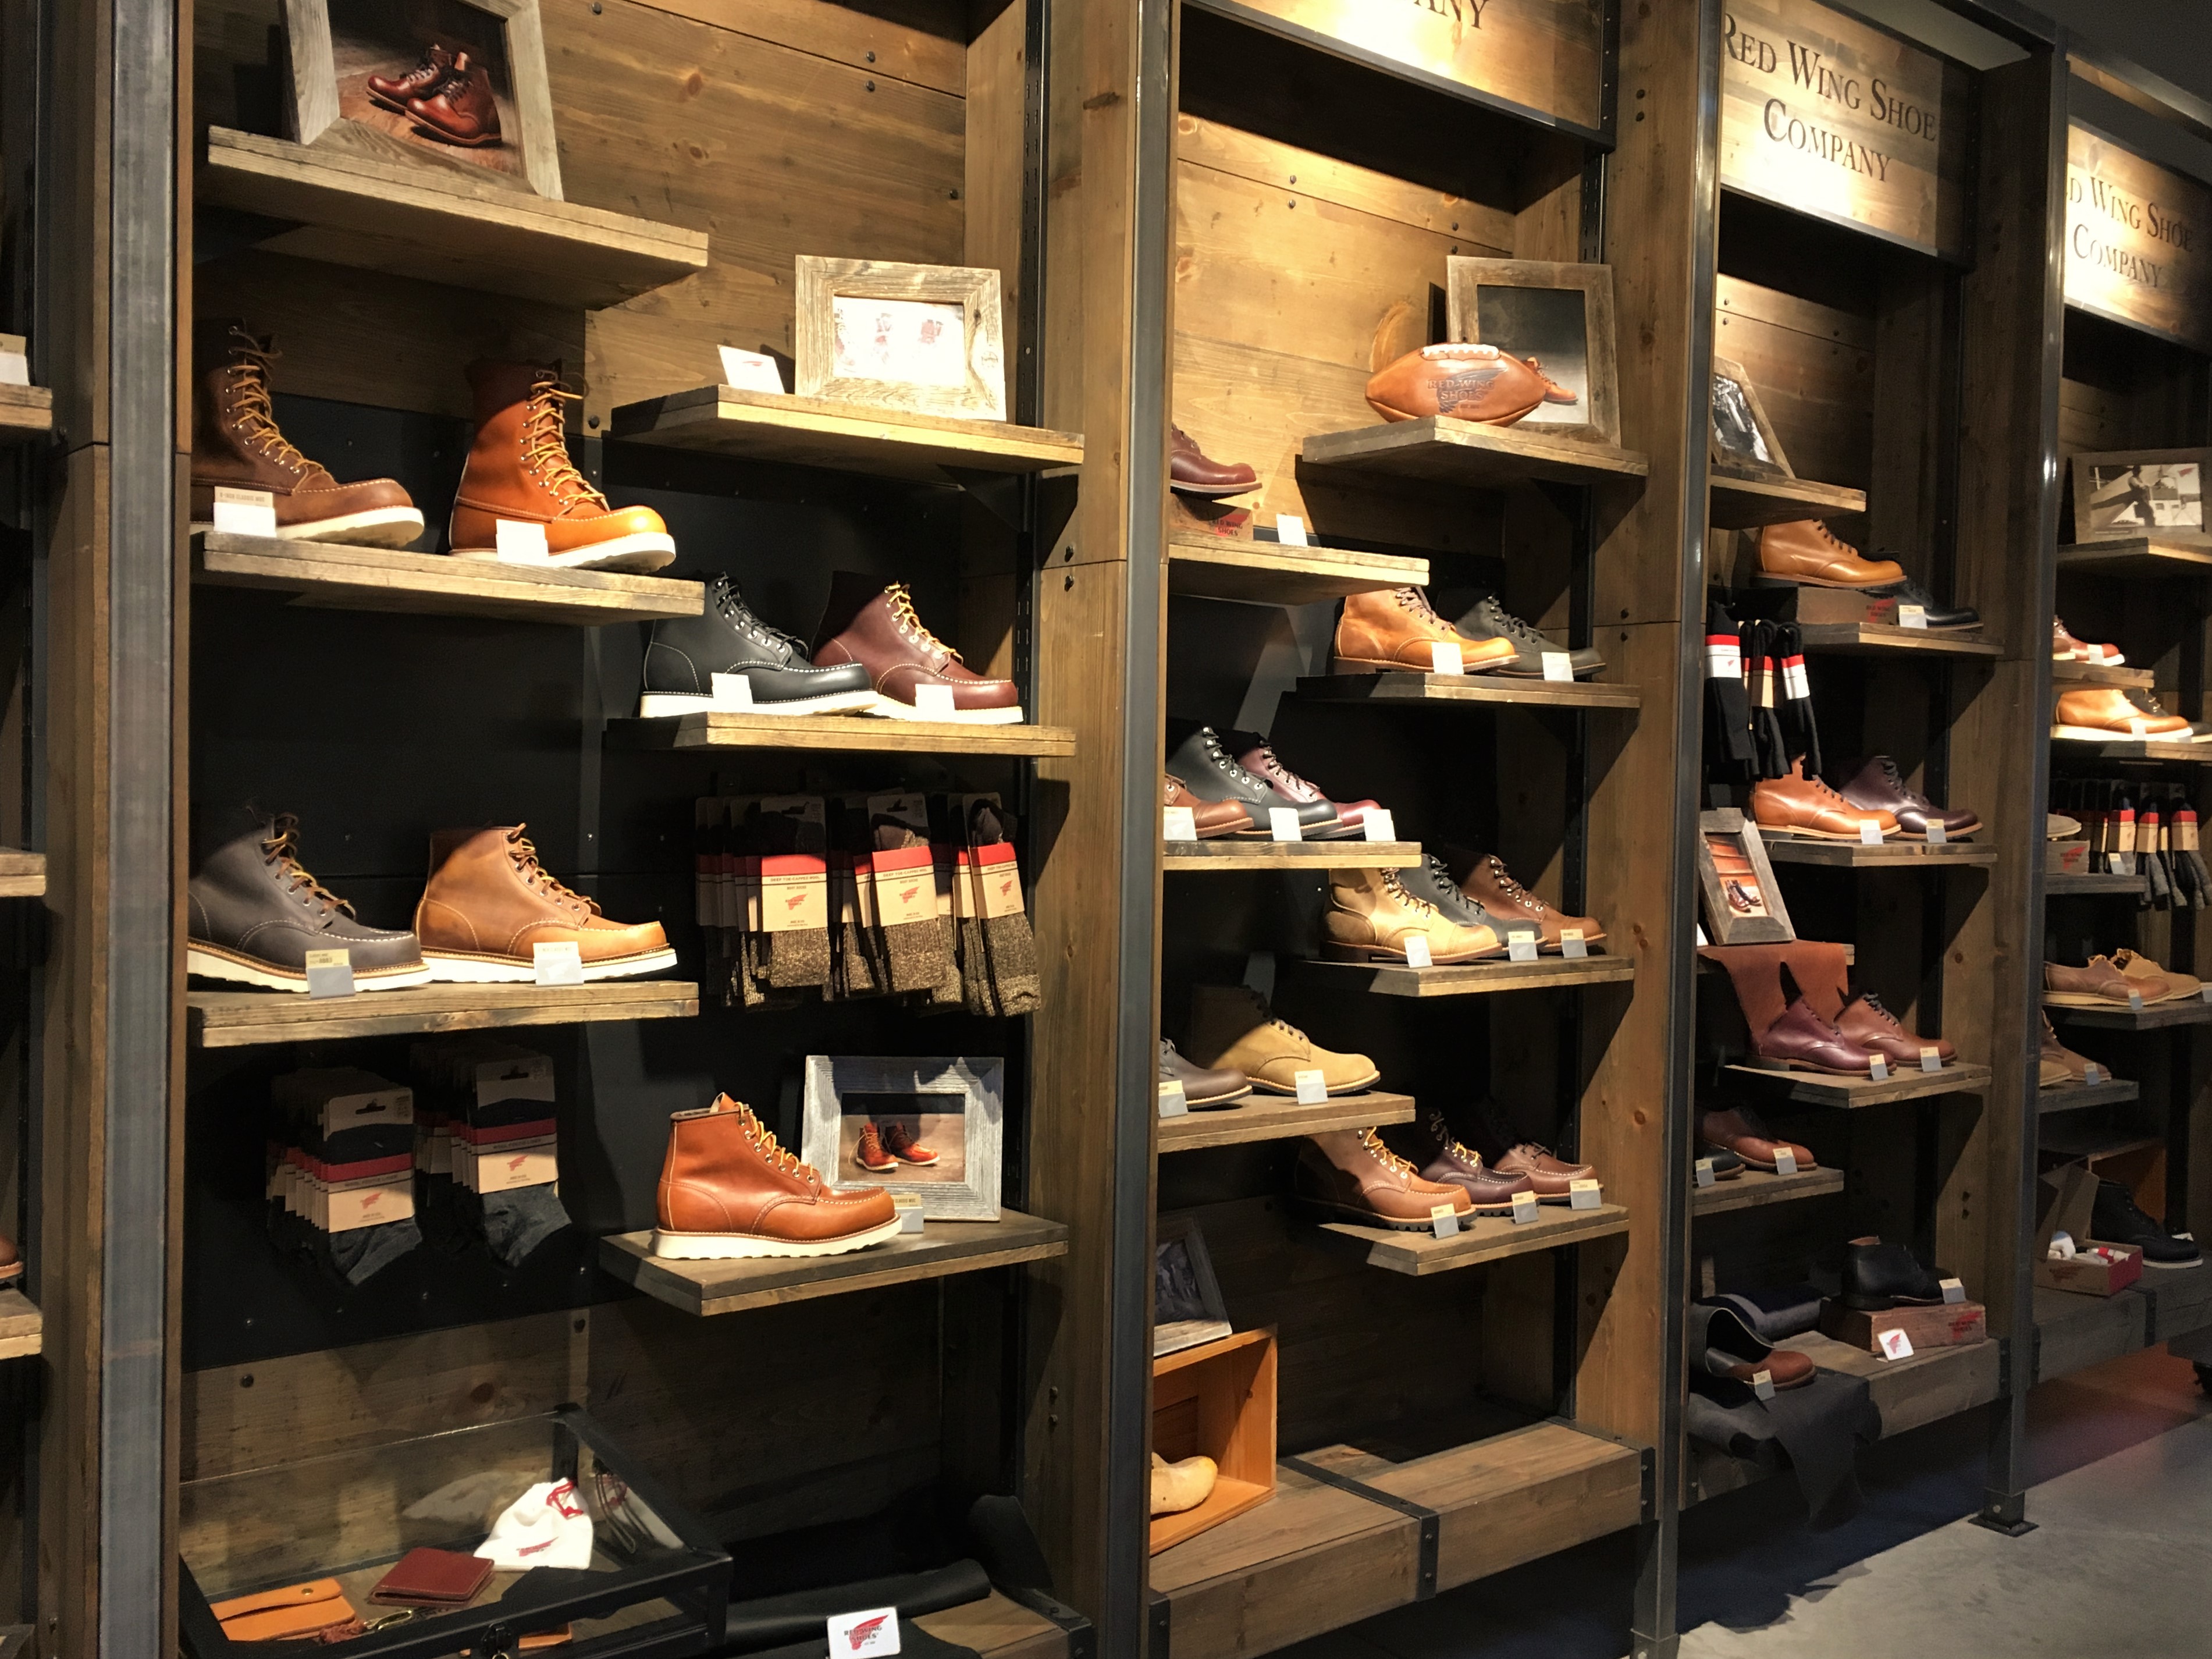 red wing store